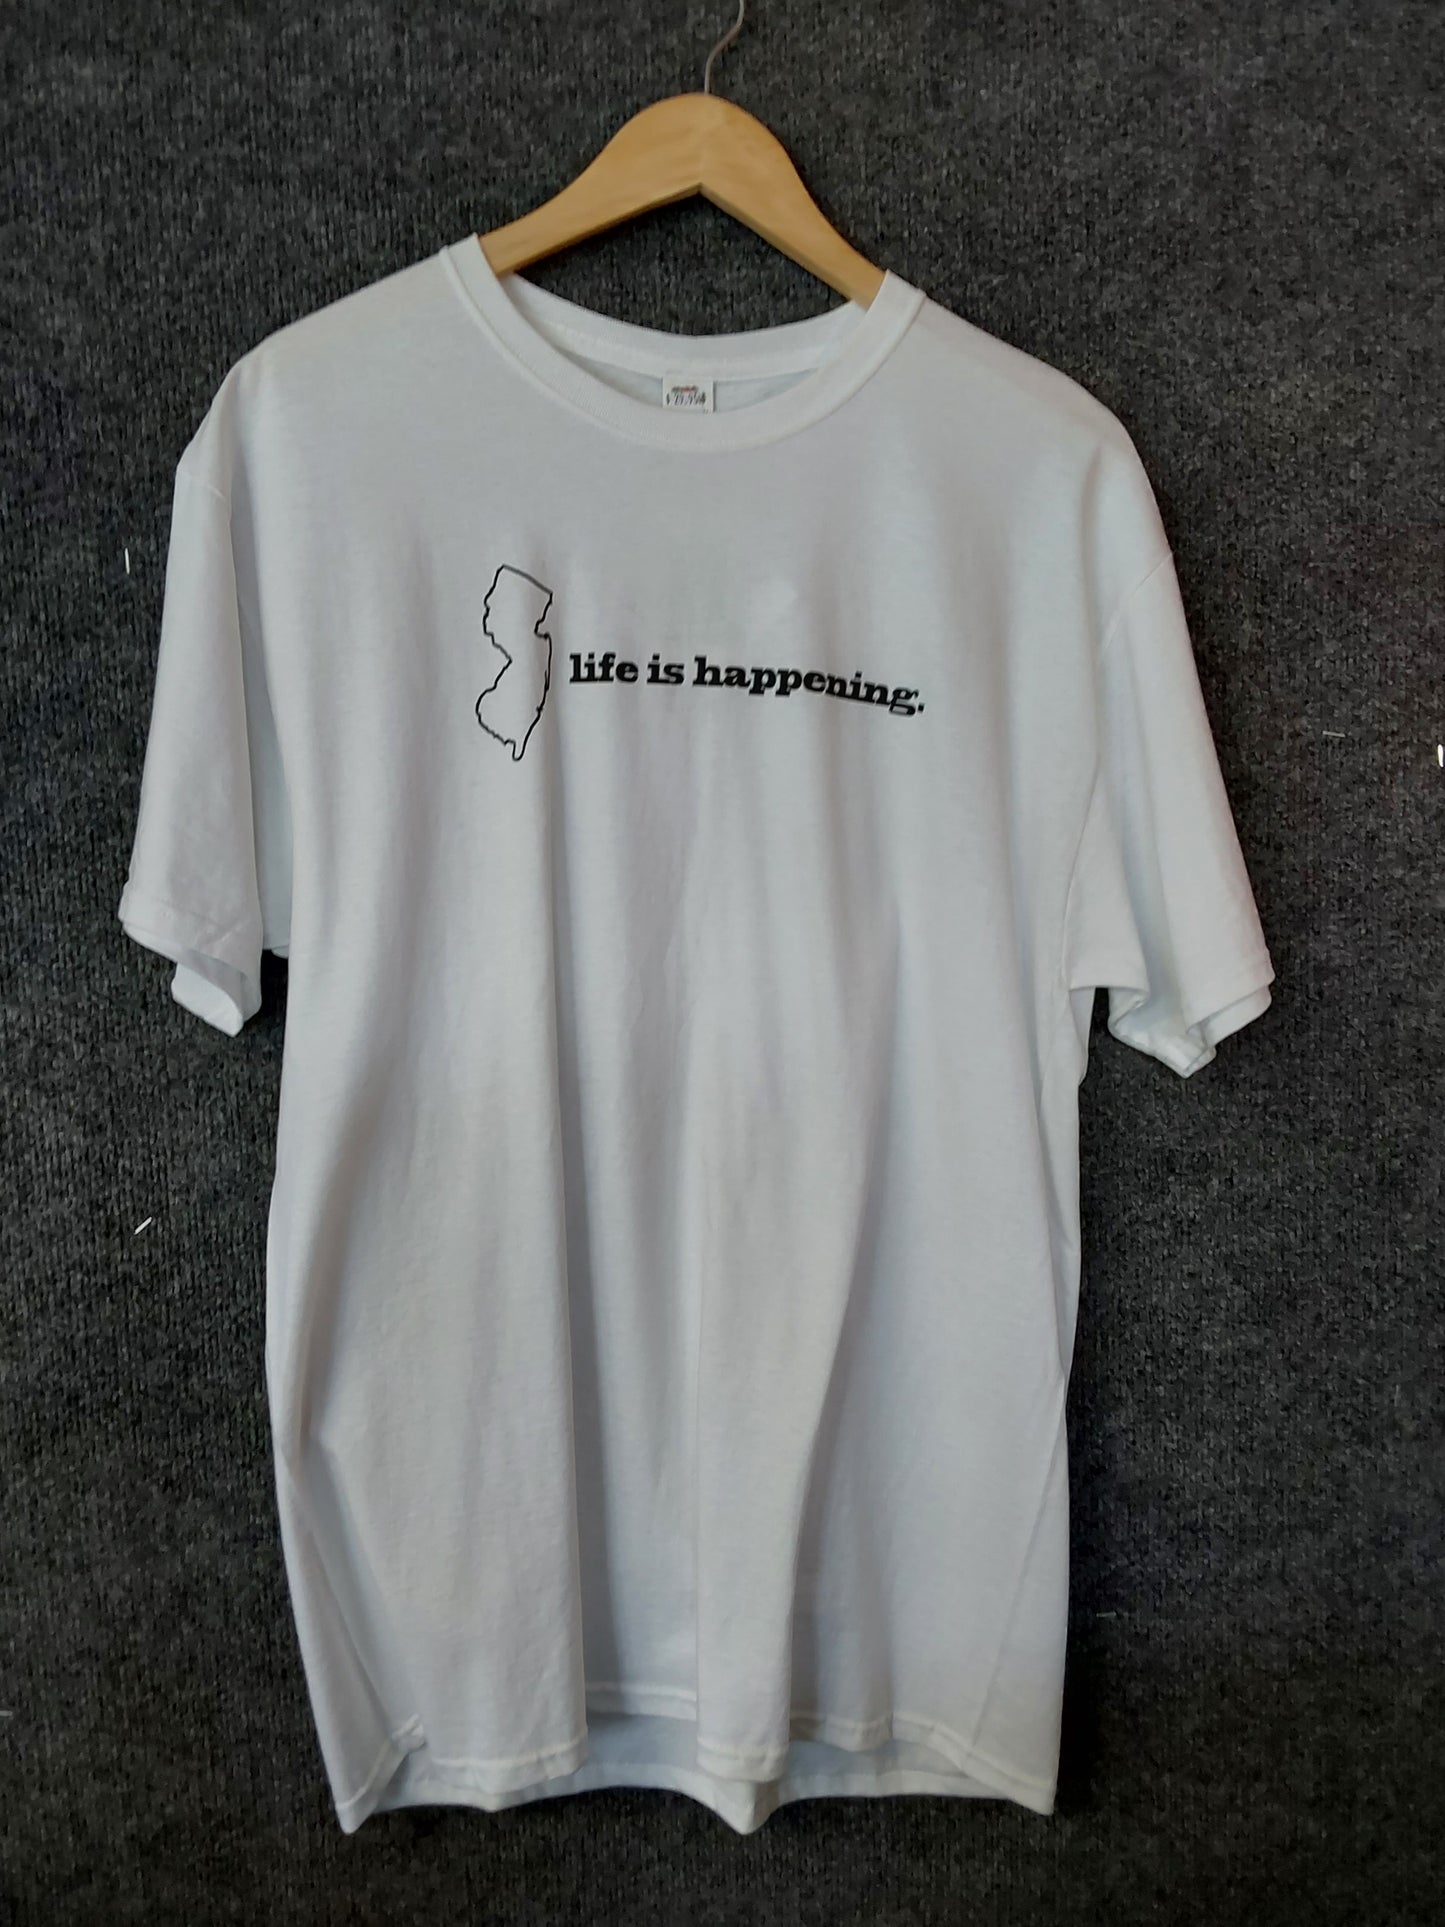 Life is Happening Dirty jersey Fresh White T-shirt